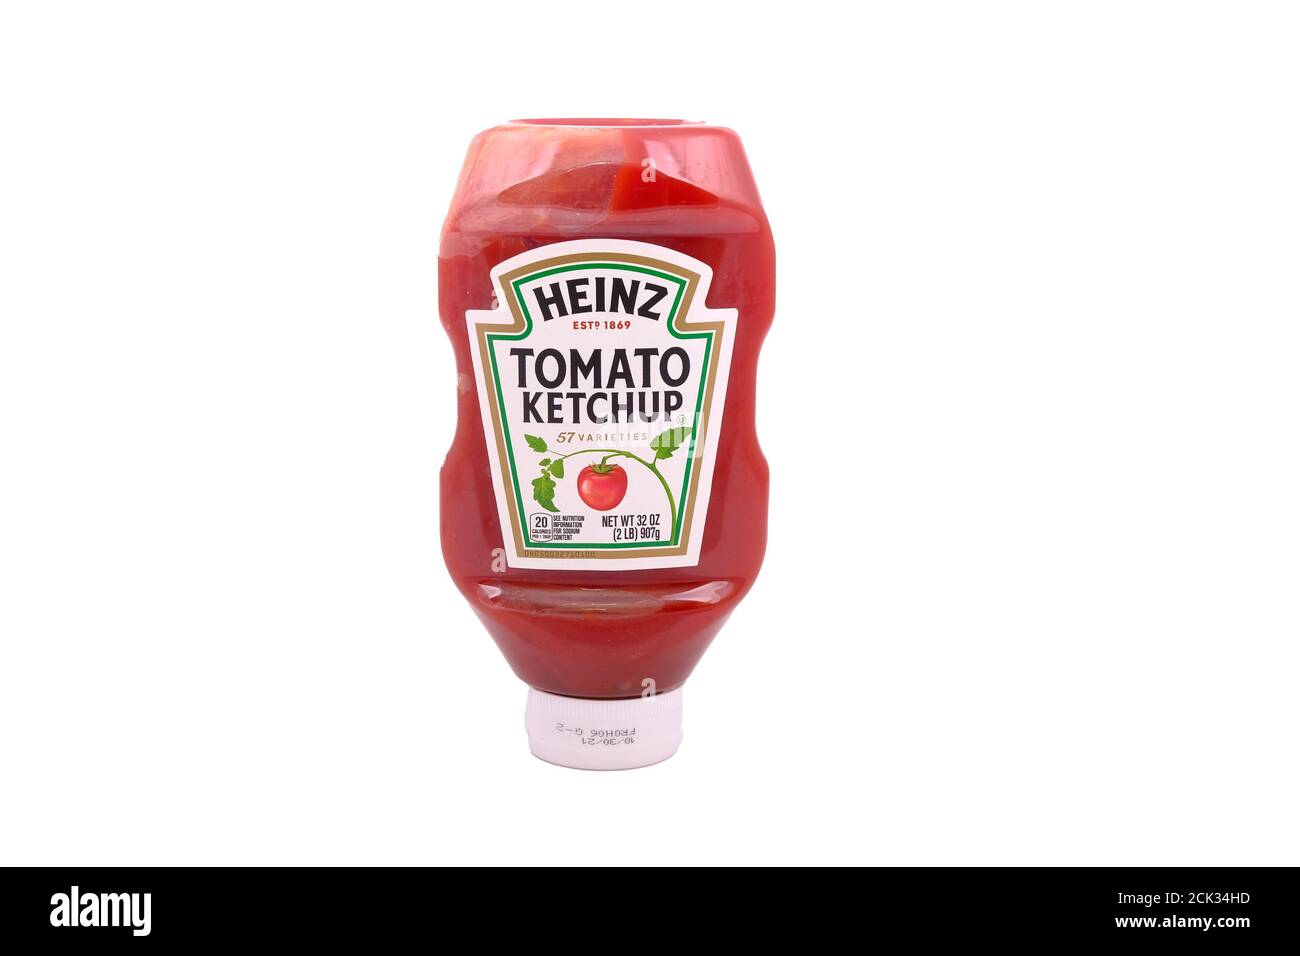 Heinz Tomato Ketchup Banque D'Images